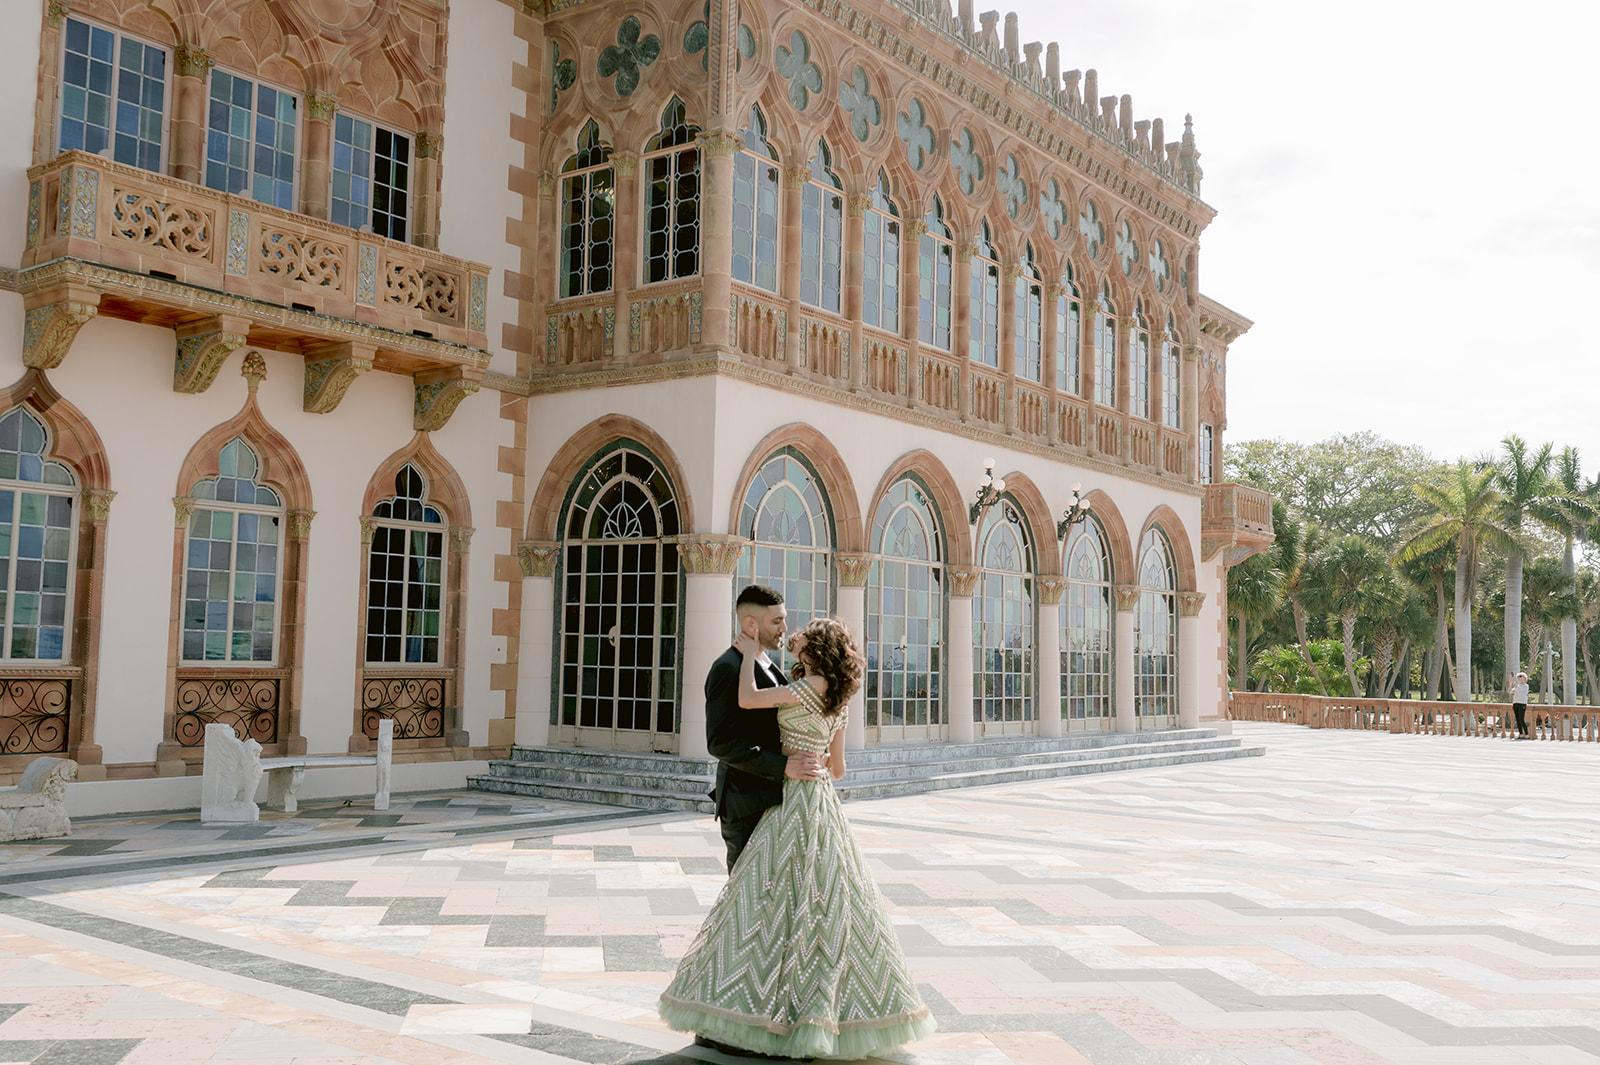 "Indian couple in traditional attire poses in front of the magnificent Ca' d'Zan mansion"
